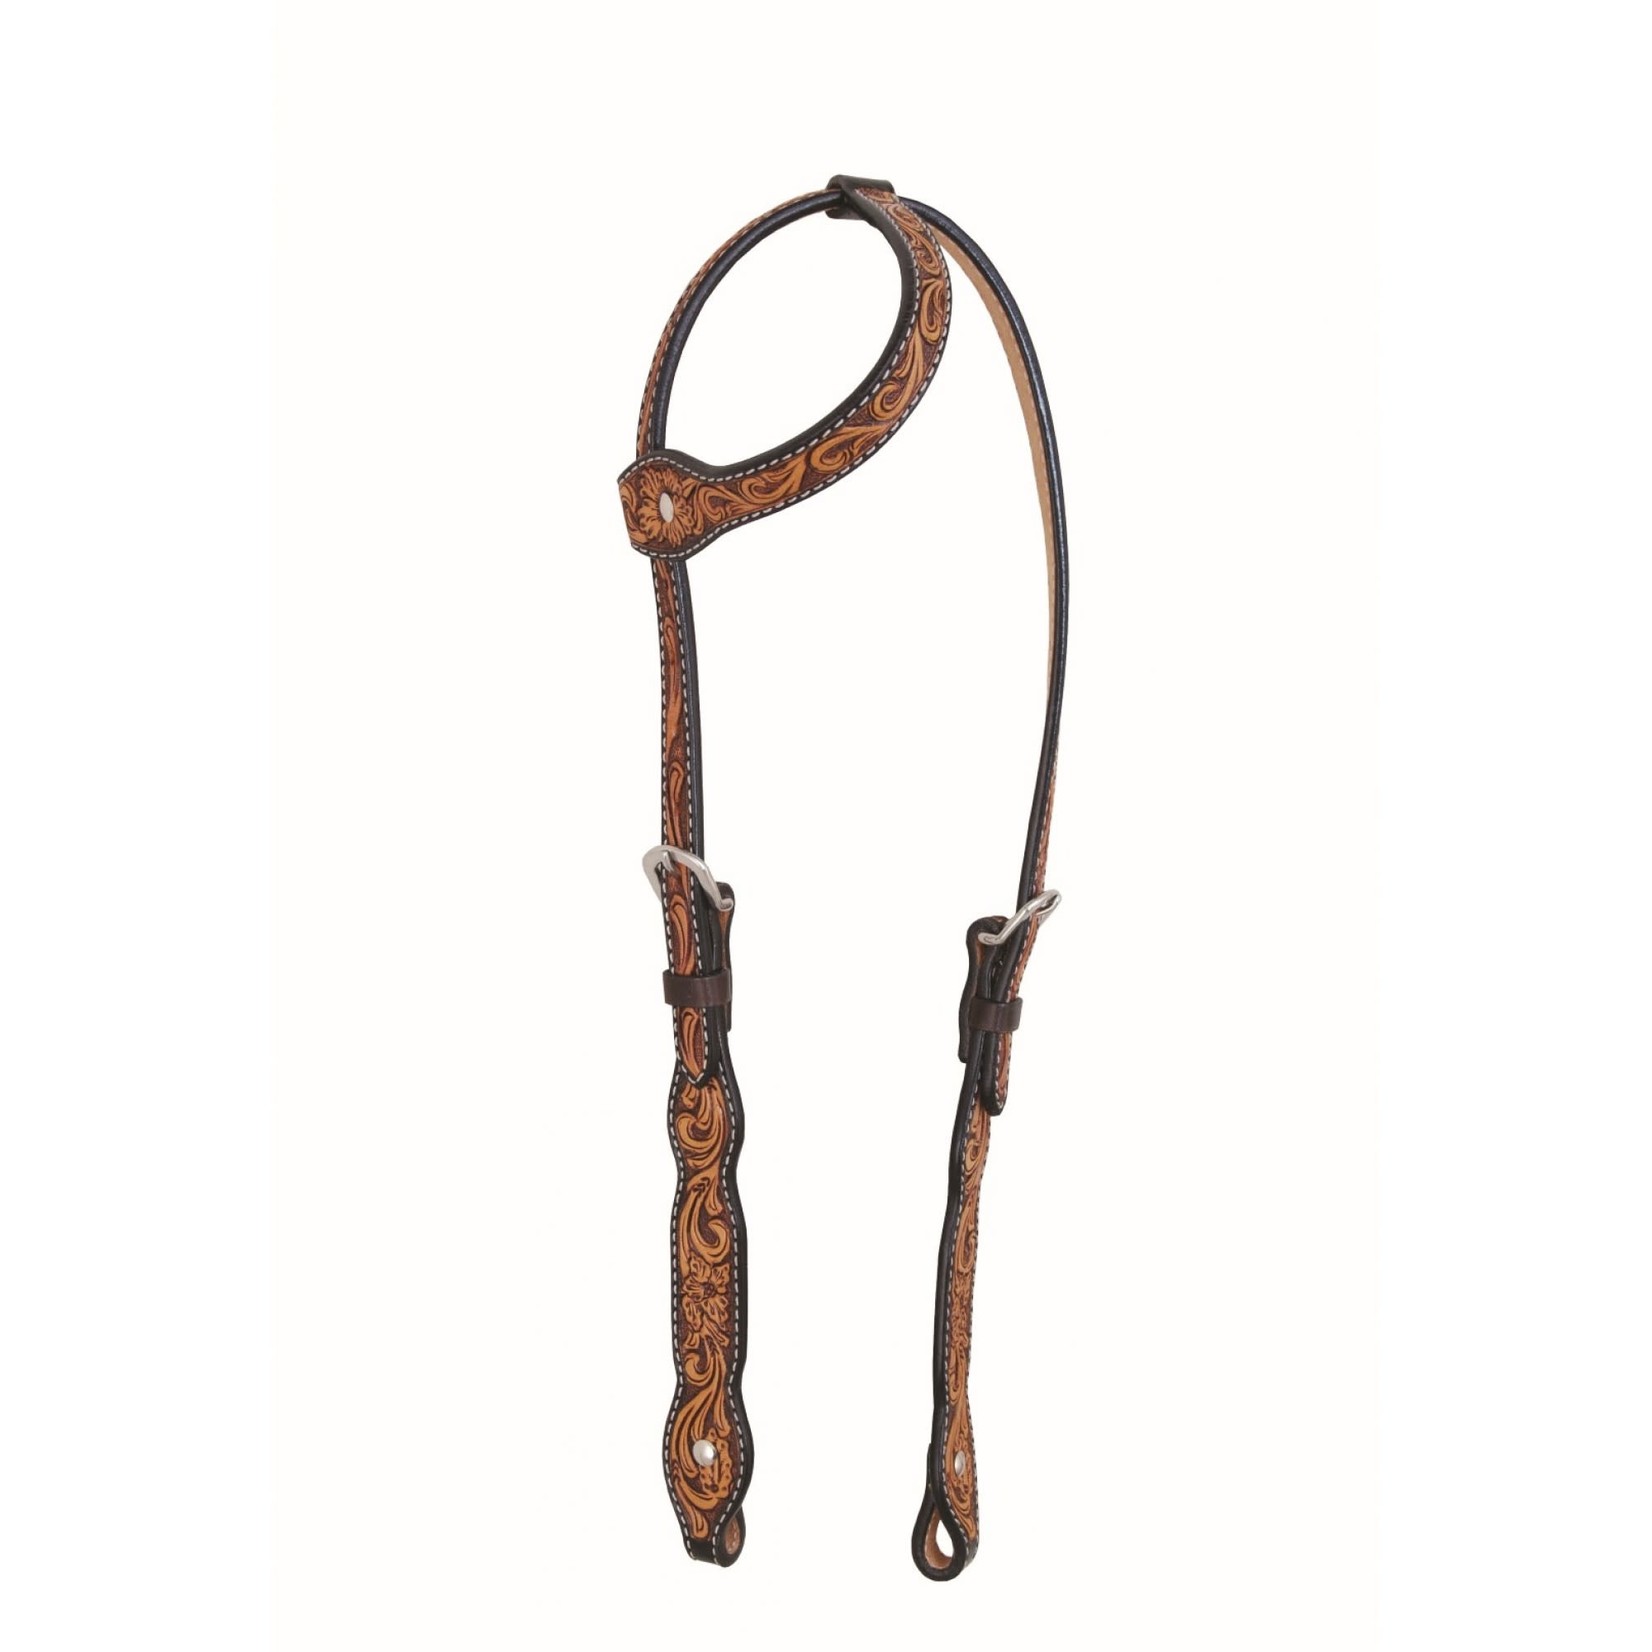 Western Rawhide By Jim Taylor Western Rawhide One Ear Headstall Scalloped Floral